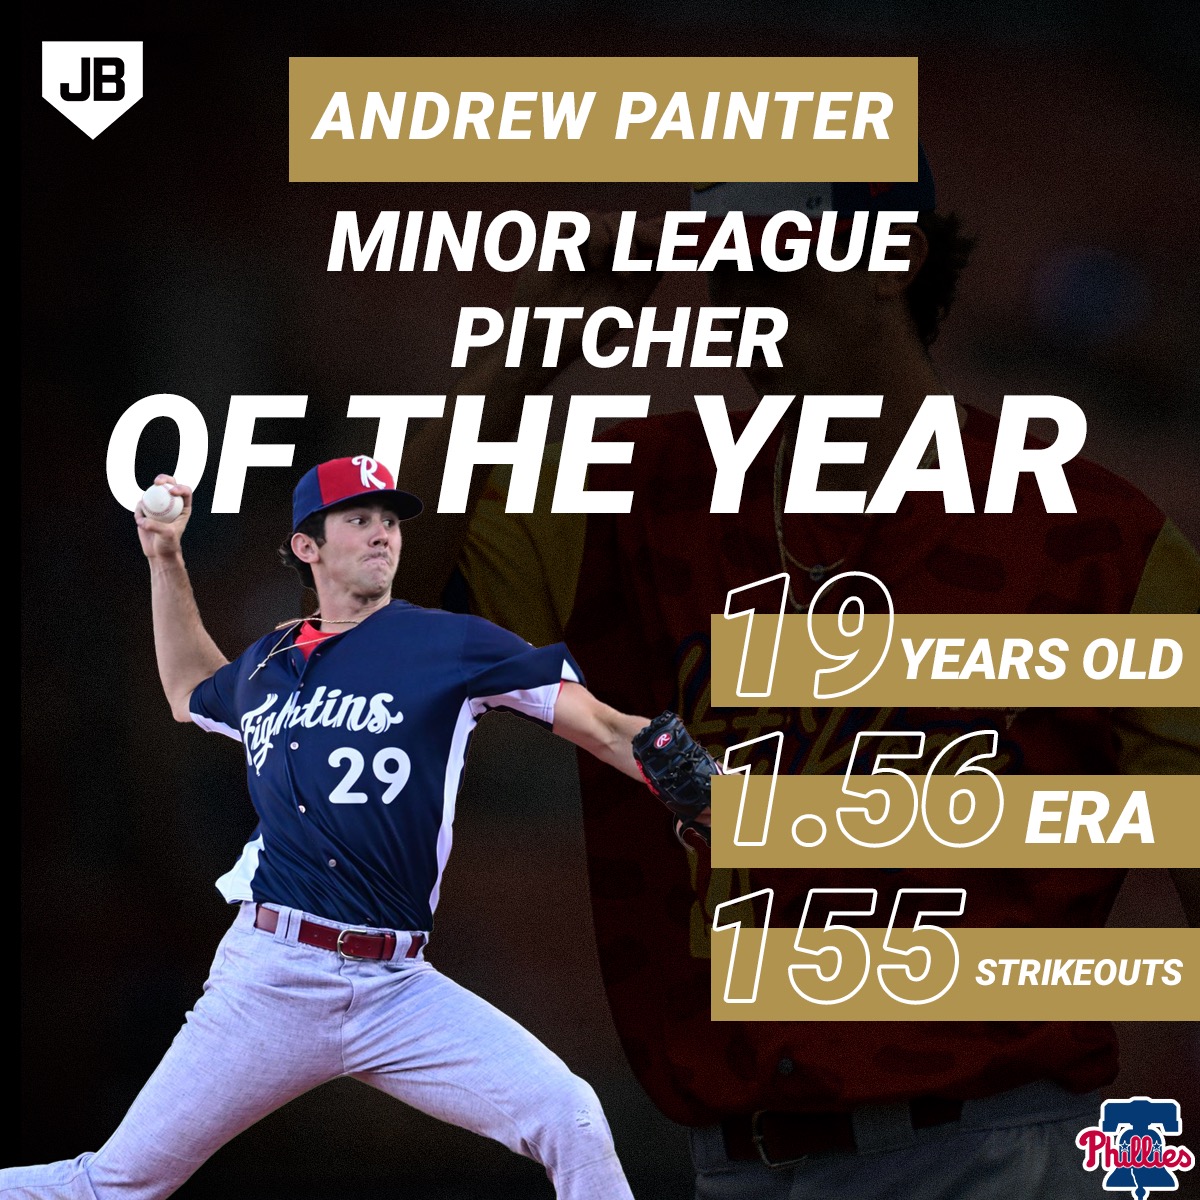 Andrew Painter is Just Baseball's Minor League Pitcher of the Year